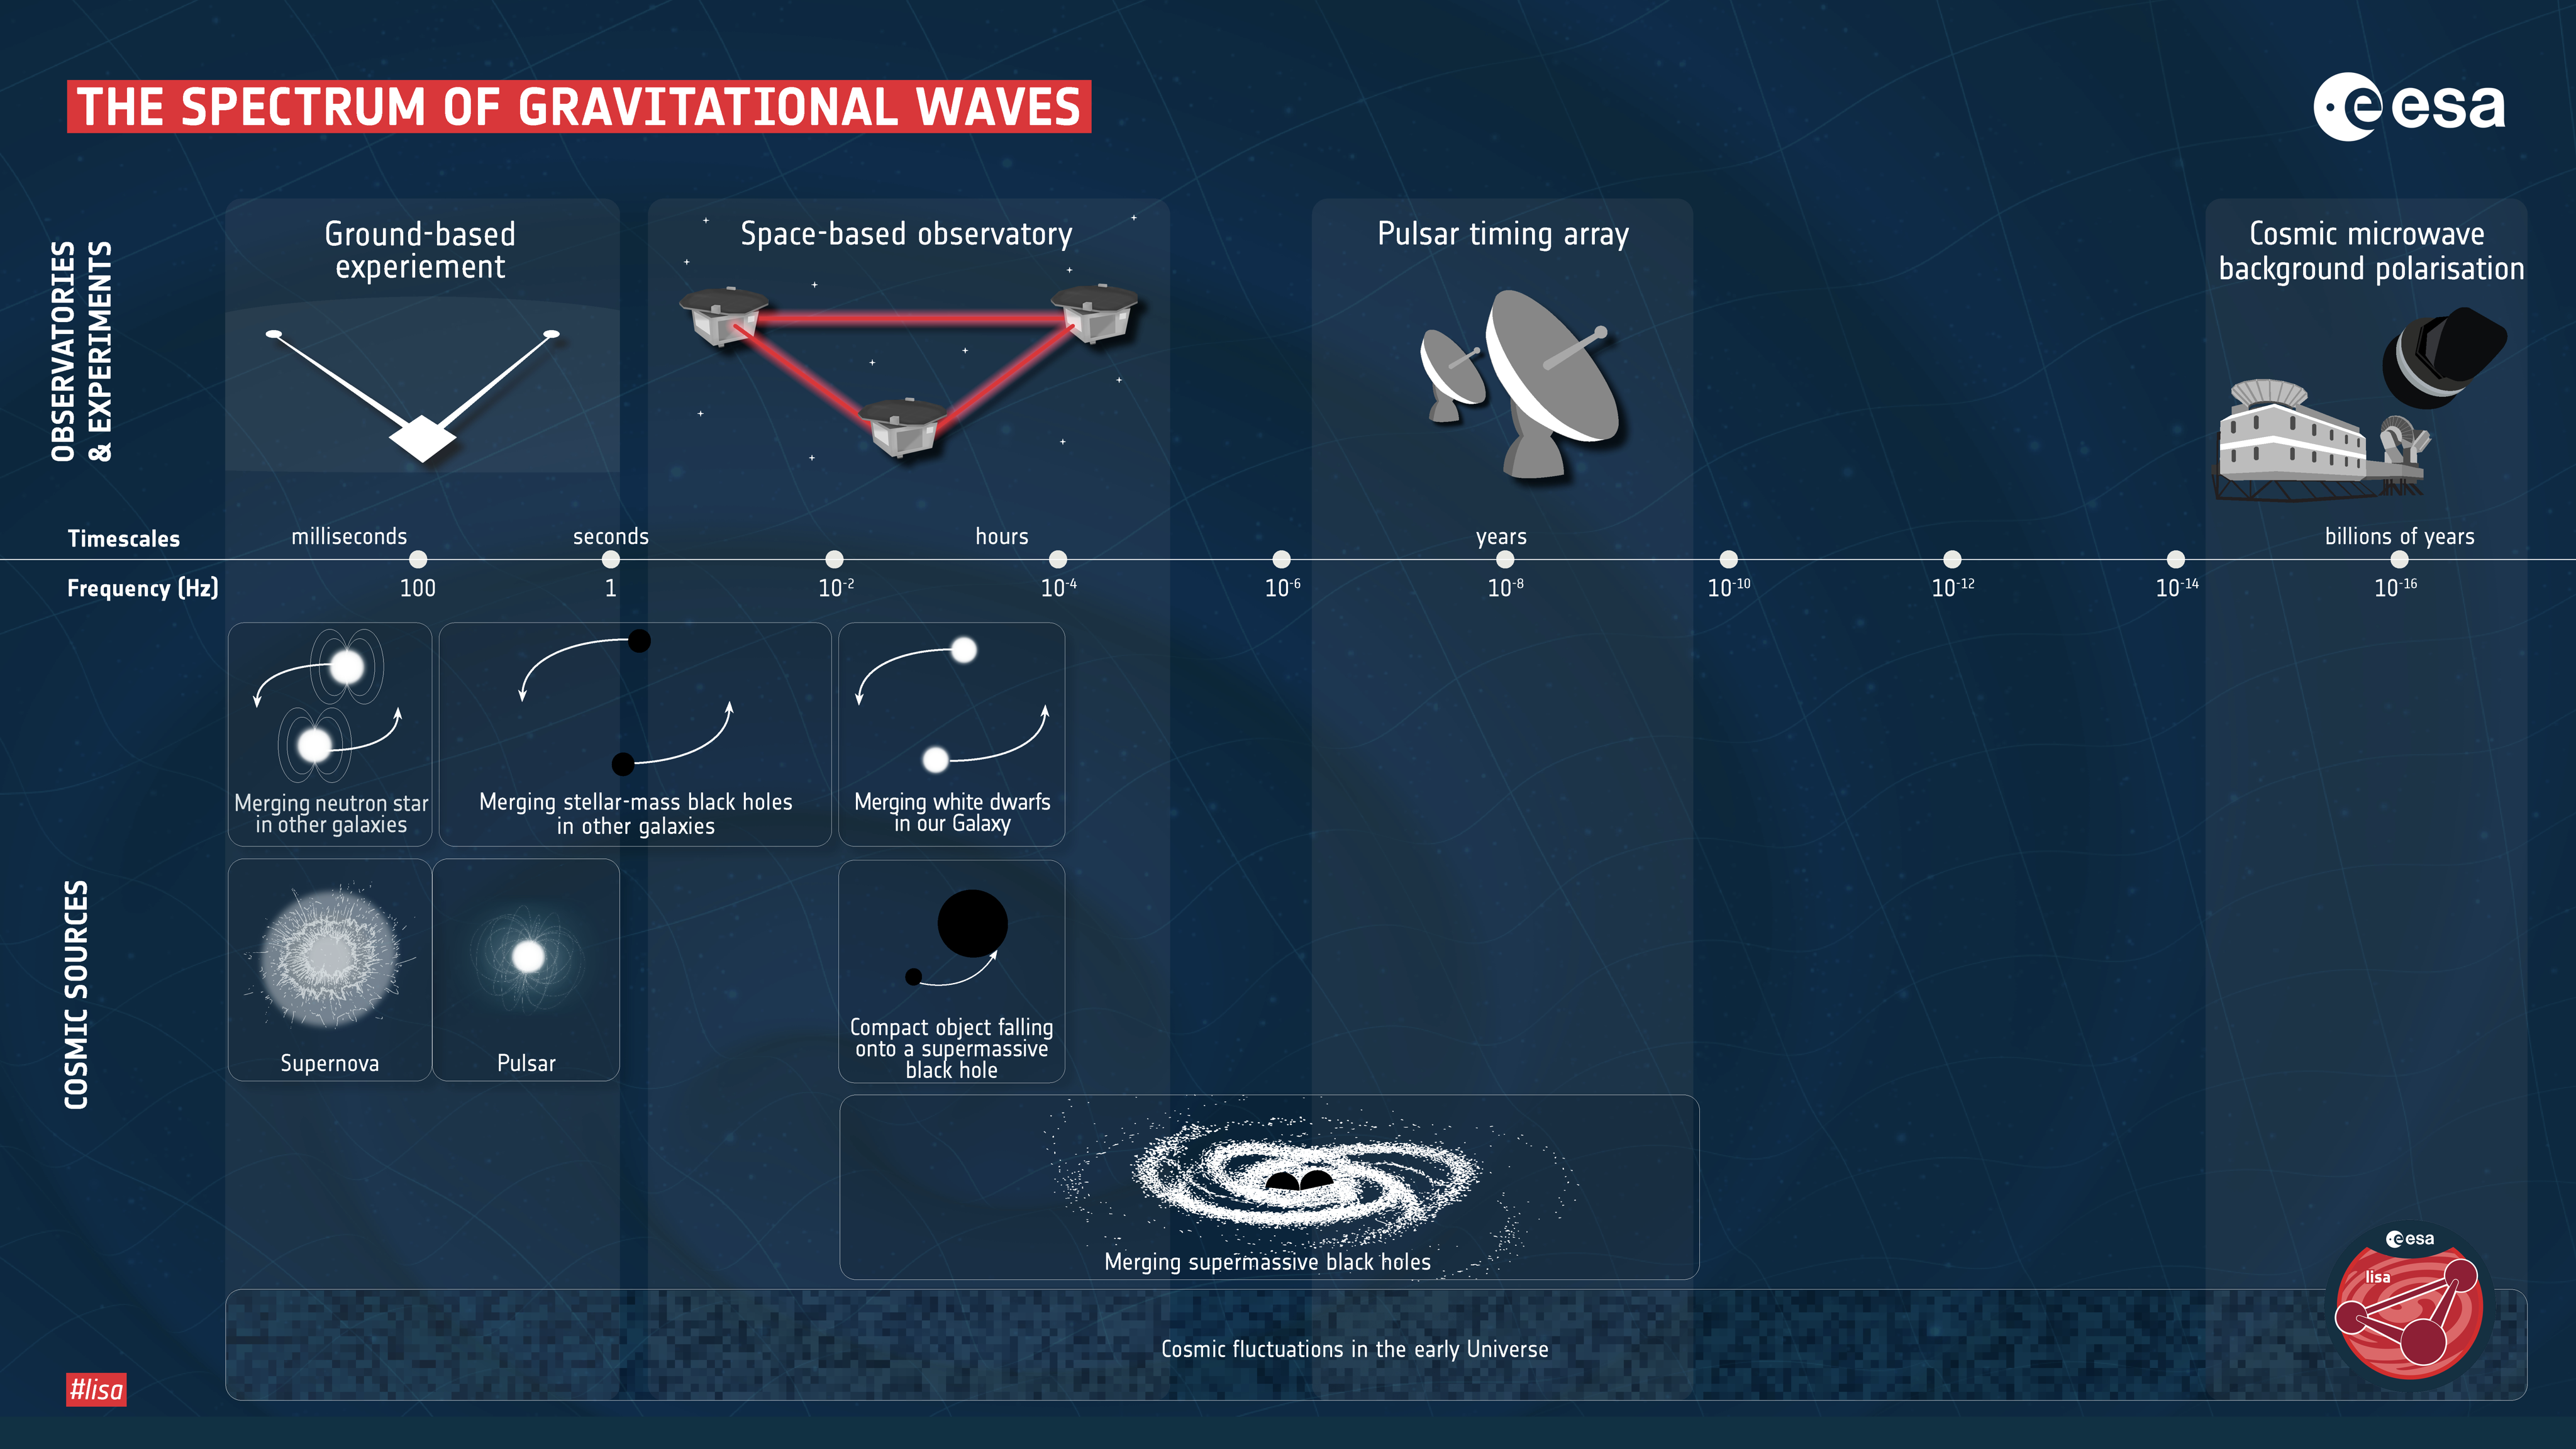 Graphic showing the gravitational wave bands